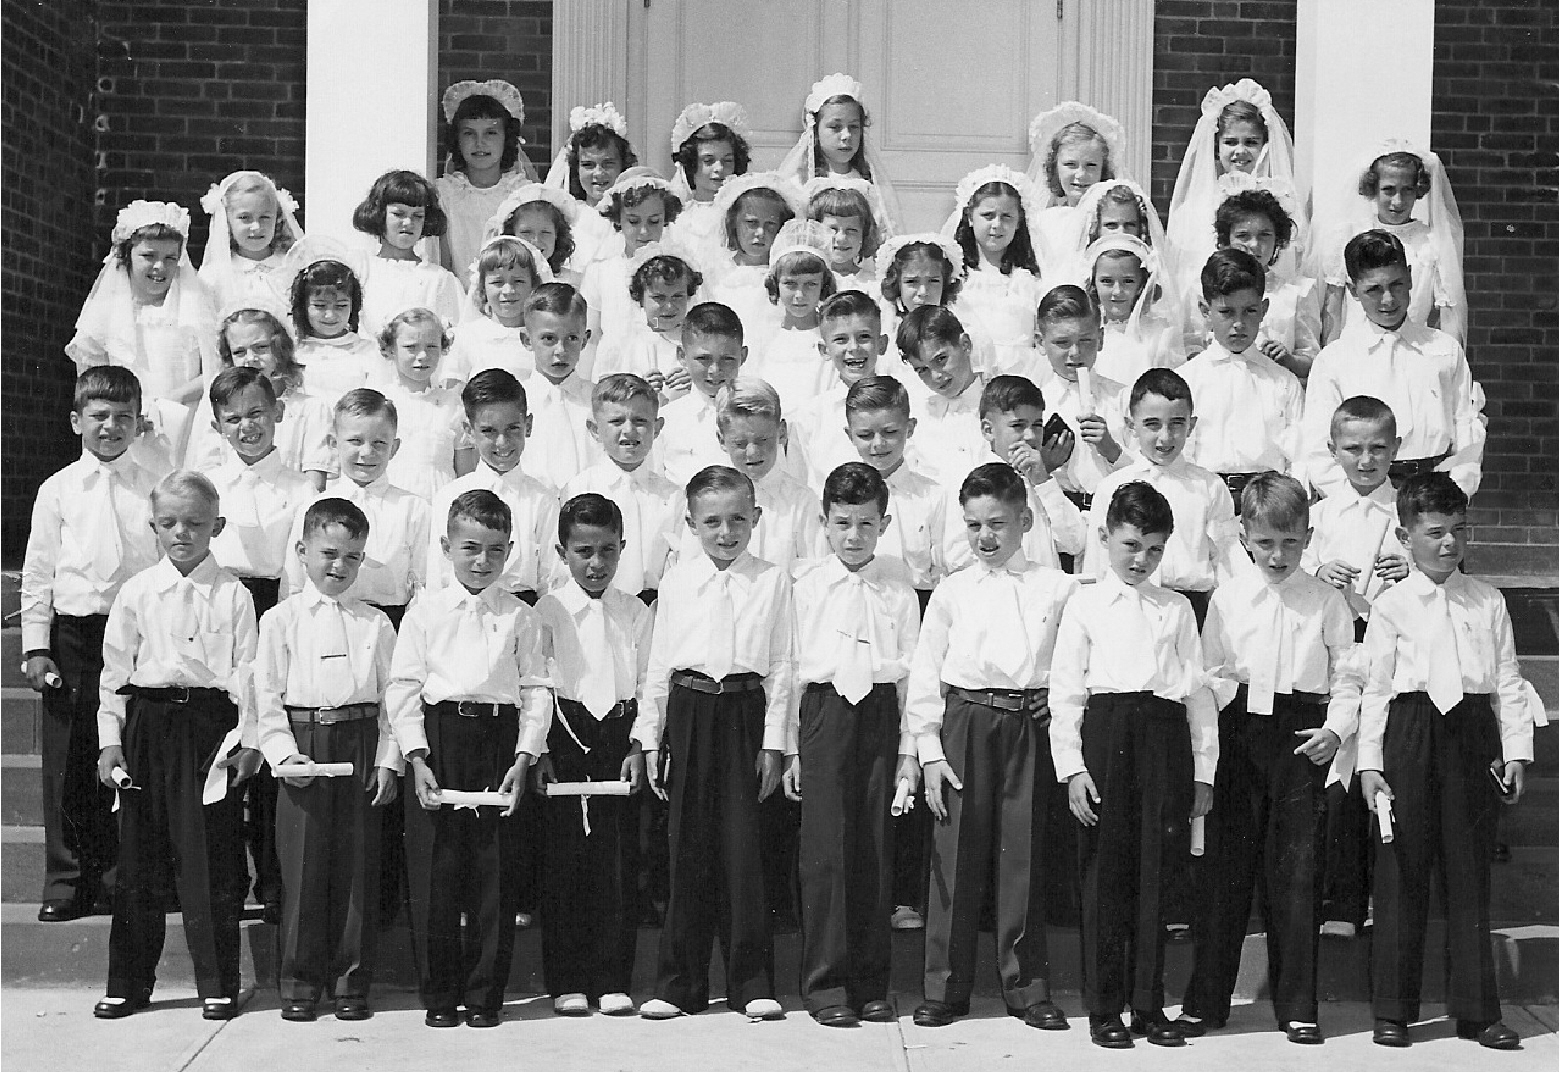 First Holy Communion - 1948 - St. Maurice Church, New Britain, Connecticut. Photo taken by my Father - that's me, fourth from left, second row. Kids in photo were all 7/8 years old. View full size.